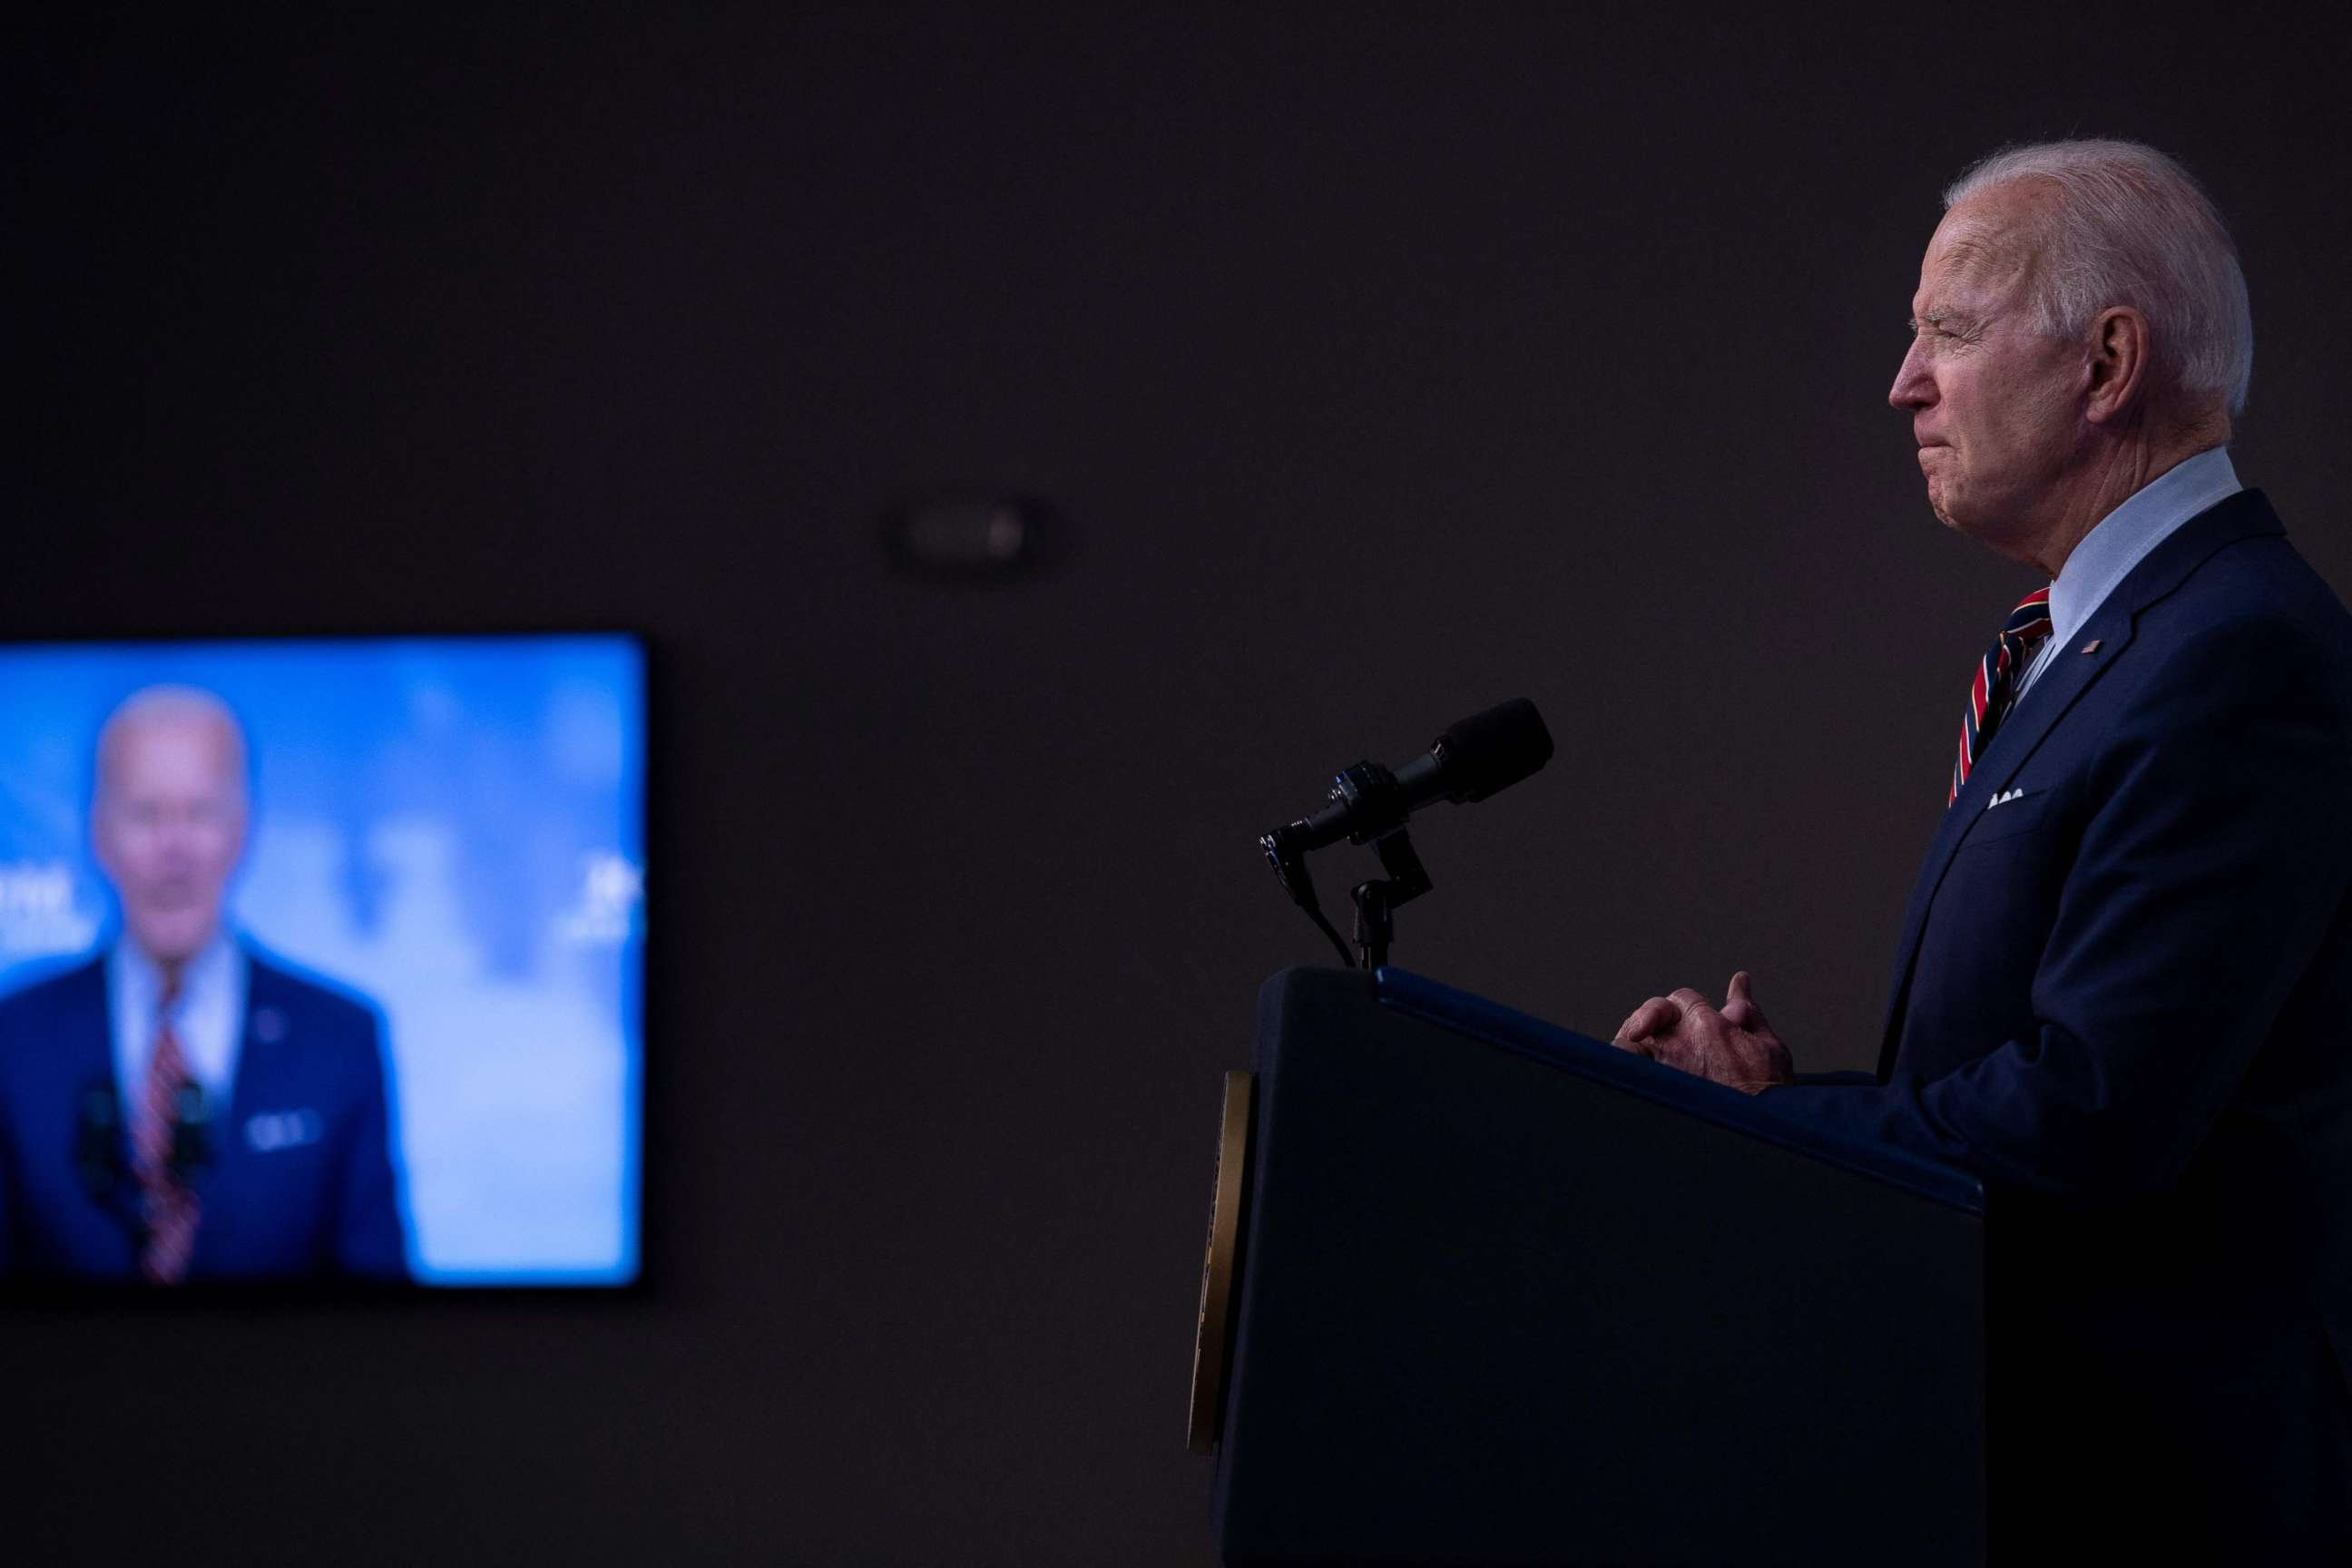 PHOTO: President Joe Biden delivers remarks at the White House complex on April 21, 2021 in Washington.